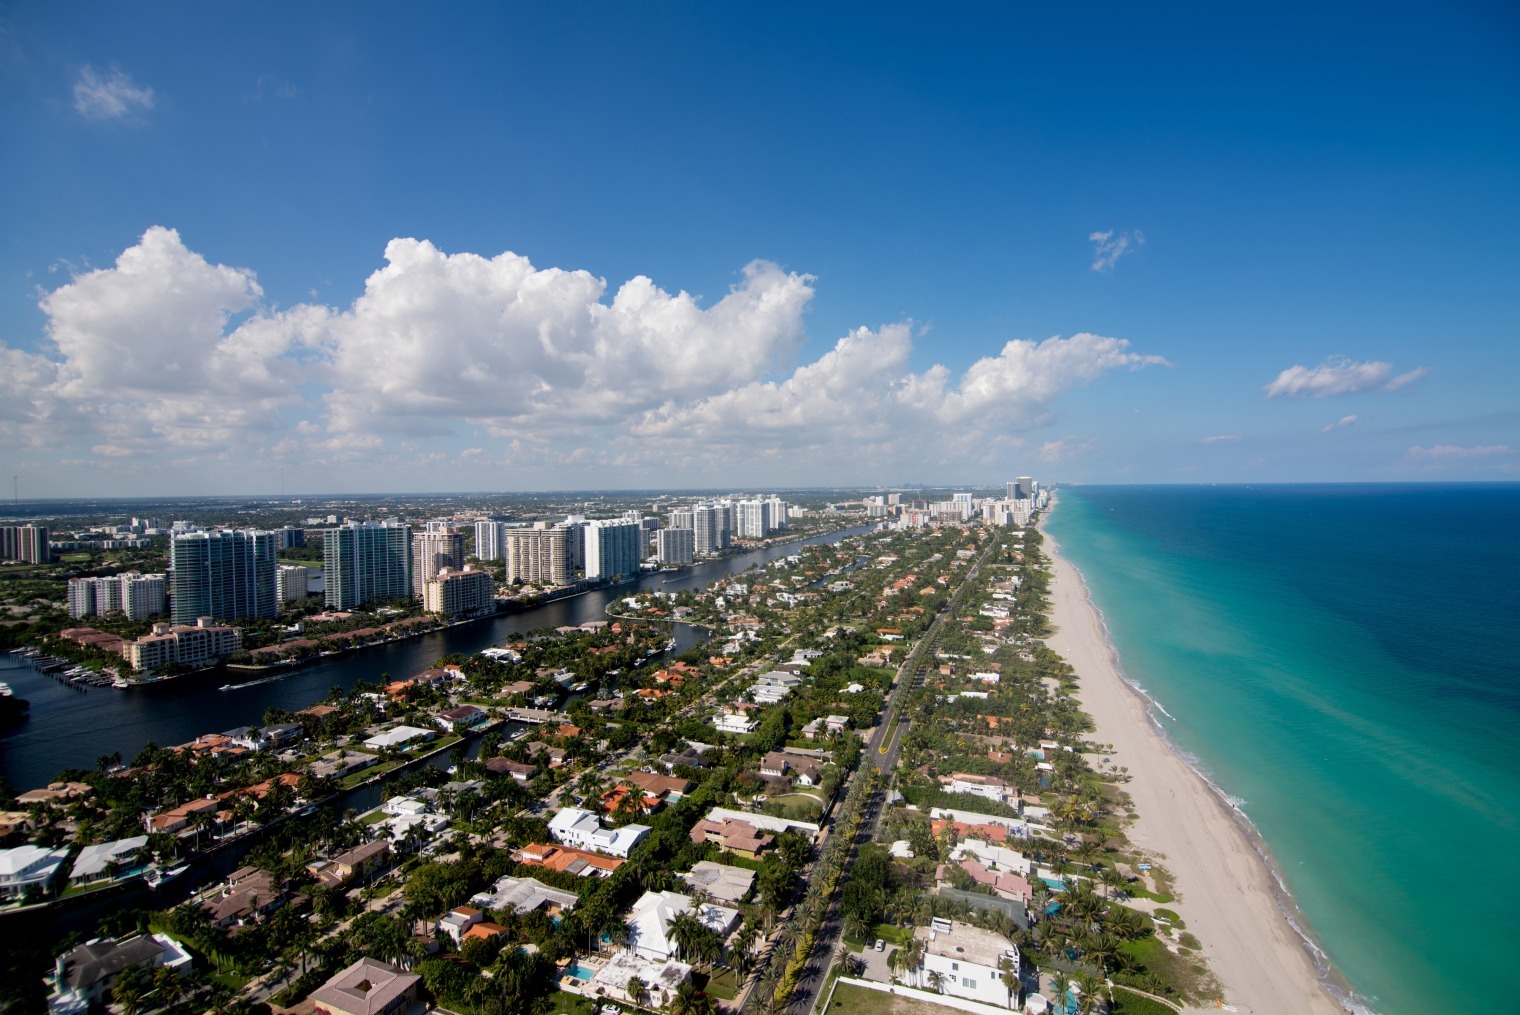 Beachfront homes are seen in the view from the penthouse of the Regalia luxury condominium in Miami Beach, Florida, U.S., on Tuesday, Feb. 11, 2014.  Photographer: Christina Mendenhall/Bloomberg